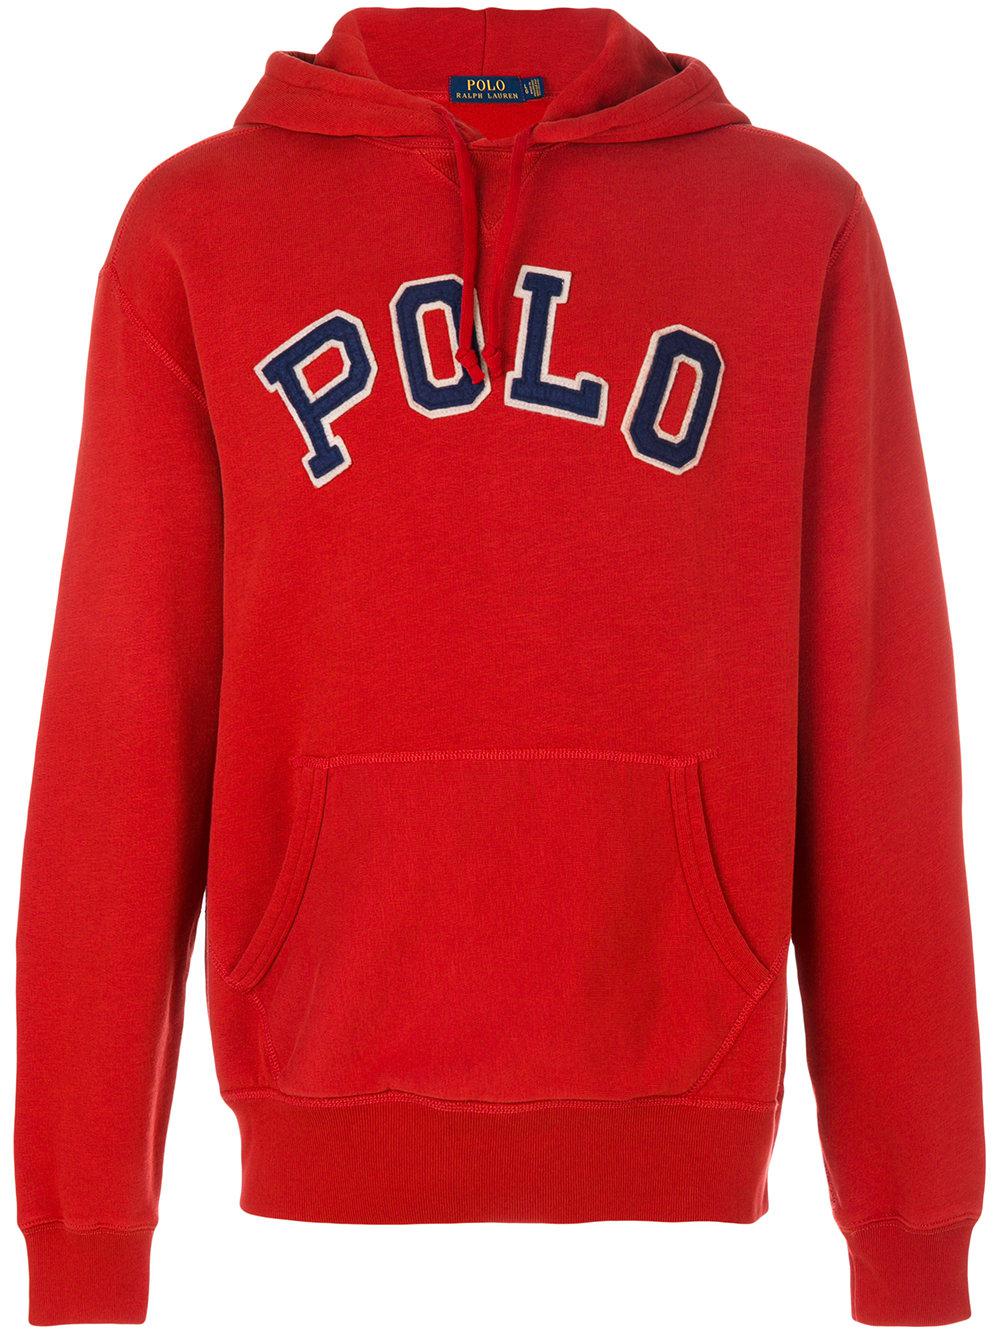 Polo Ralph Lauren Cotton Polo Hoodie in Red for Men - Lyst